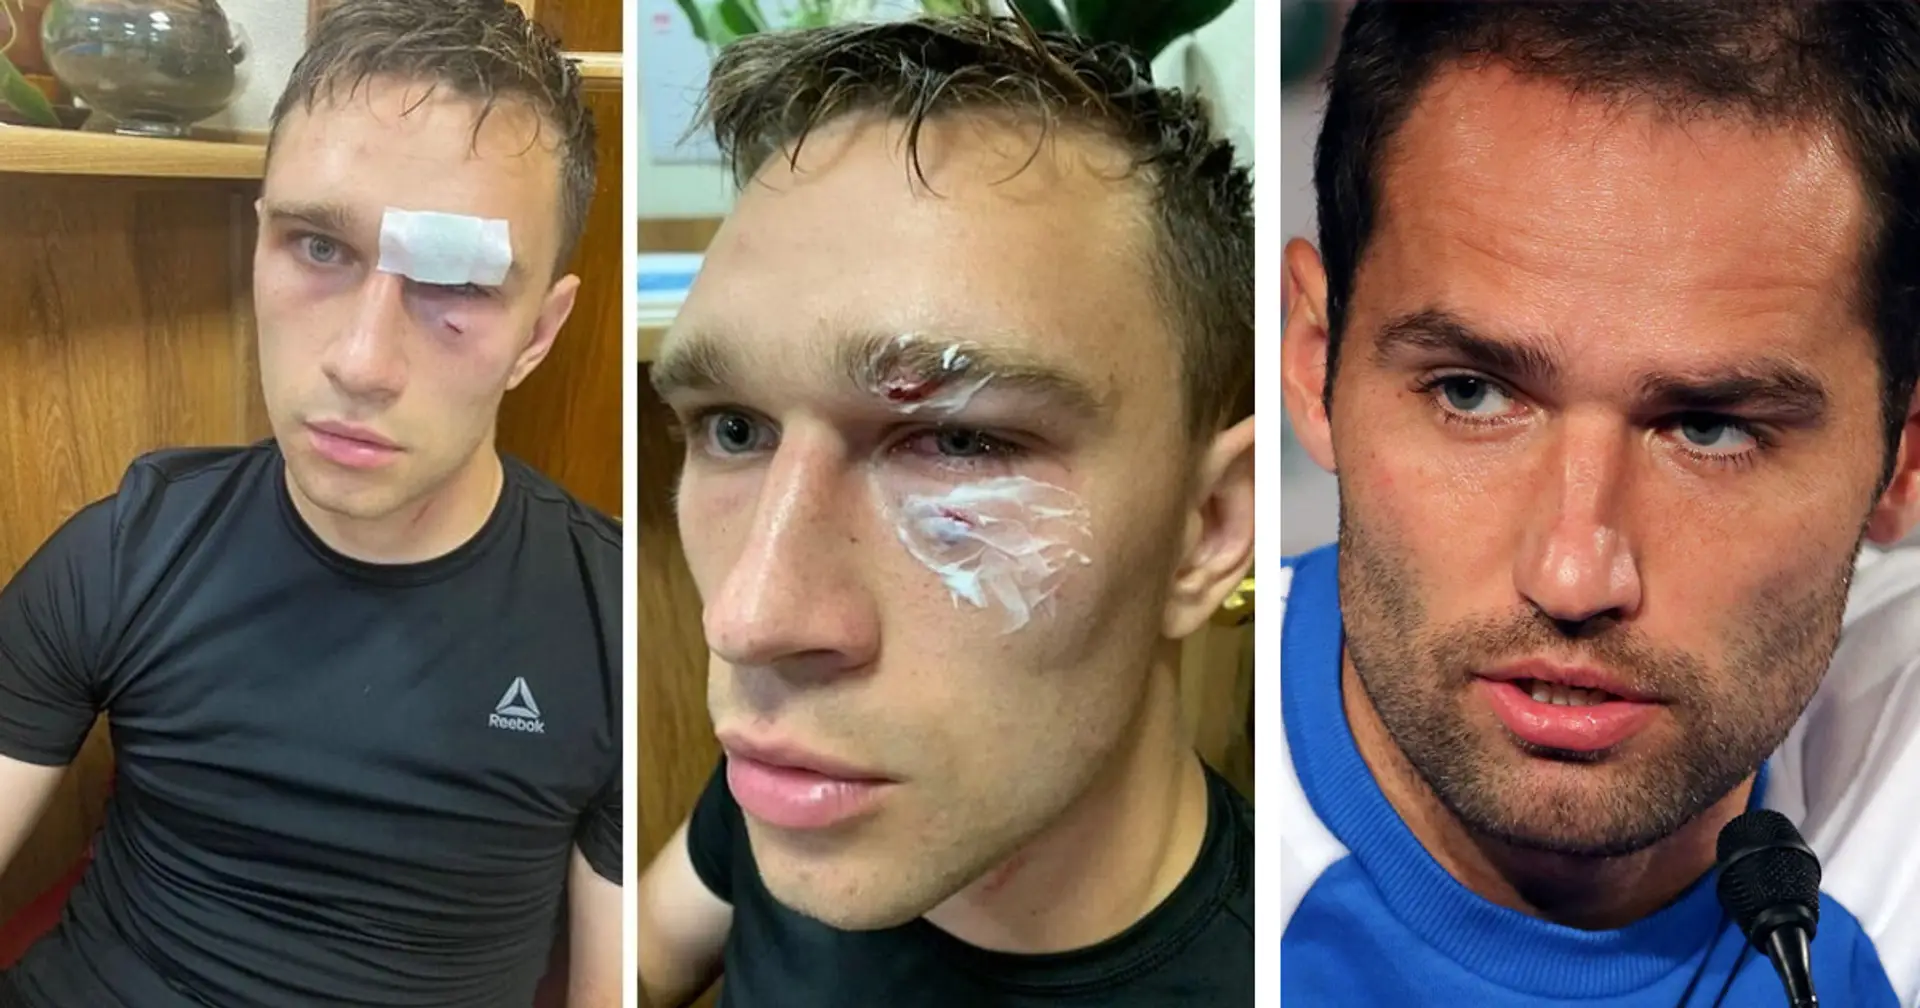 Former Russia's NT captain Roman Shirokov lands amateur league referee in hospital after on-pitch brawl